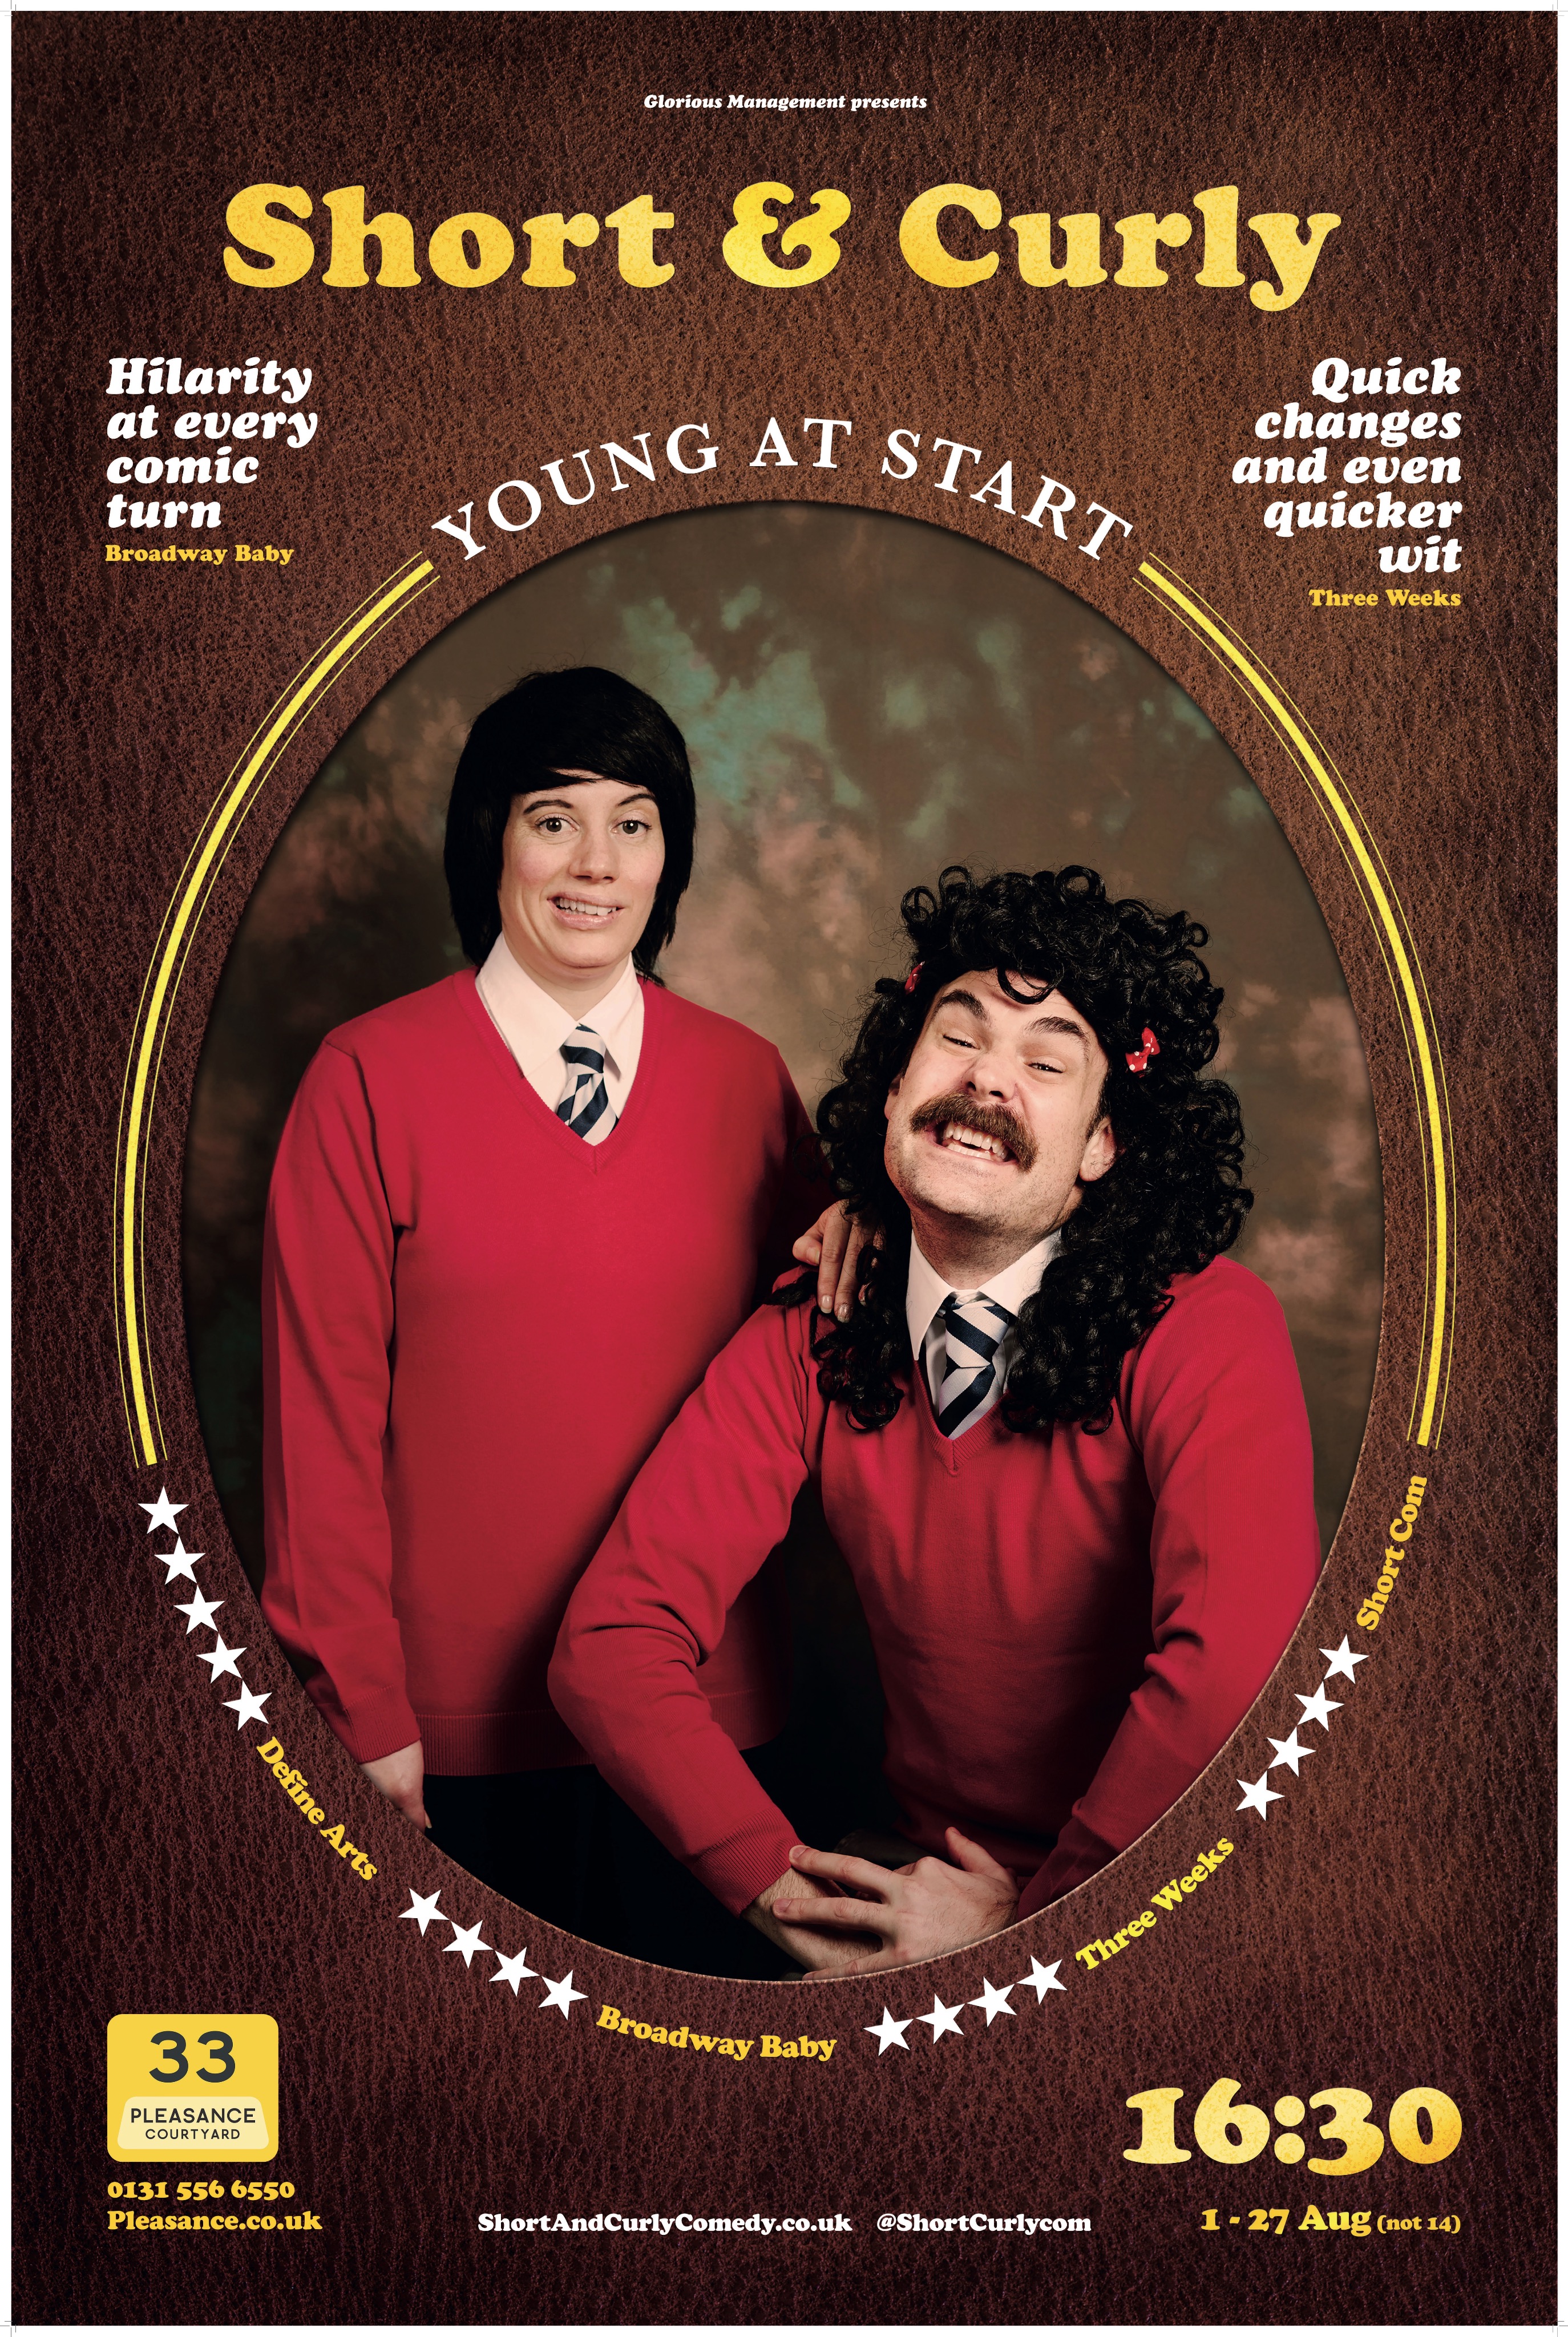 The poster for Short & Curly: Young at Start